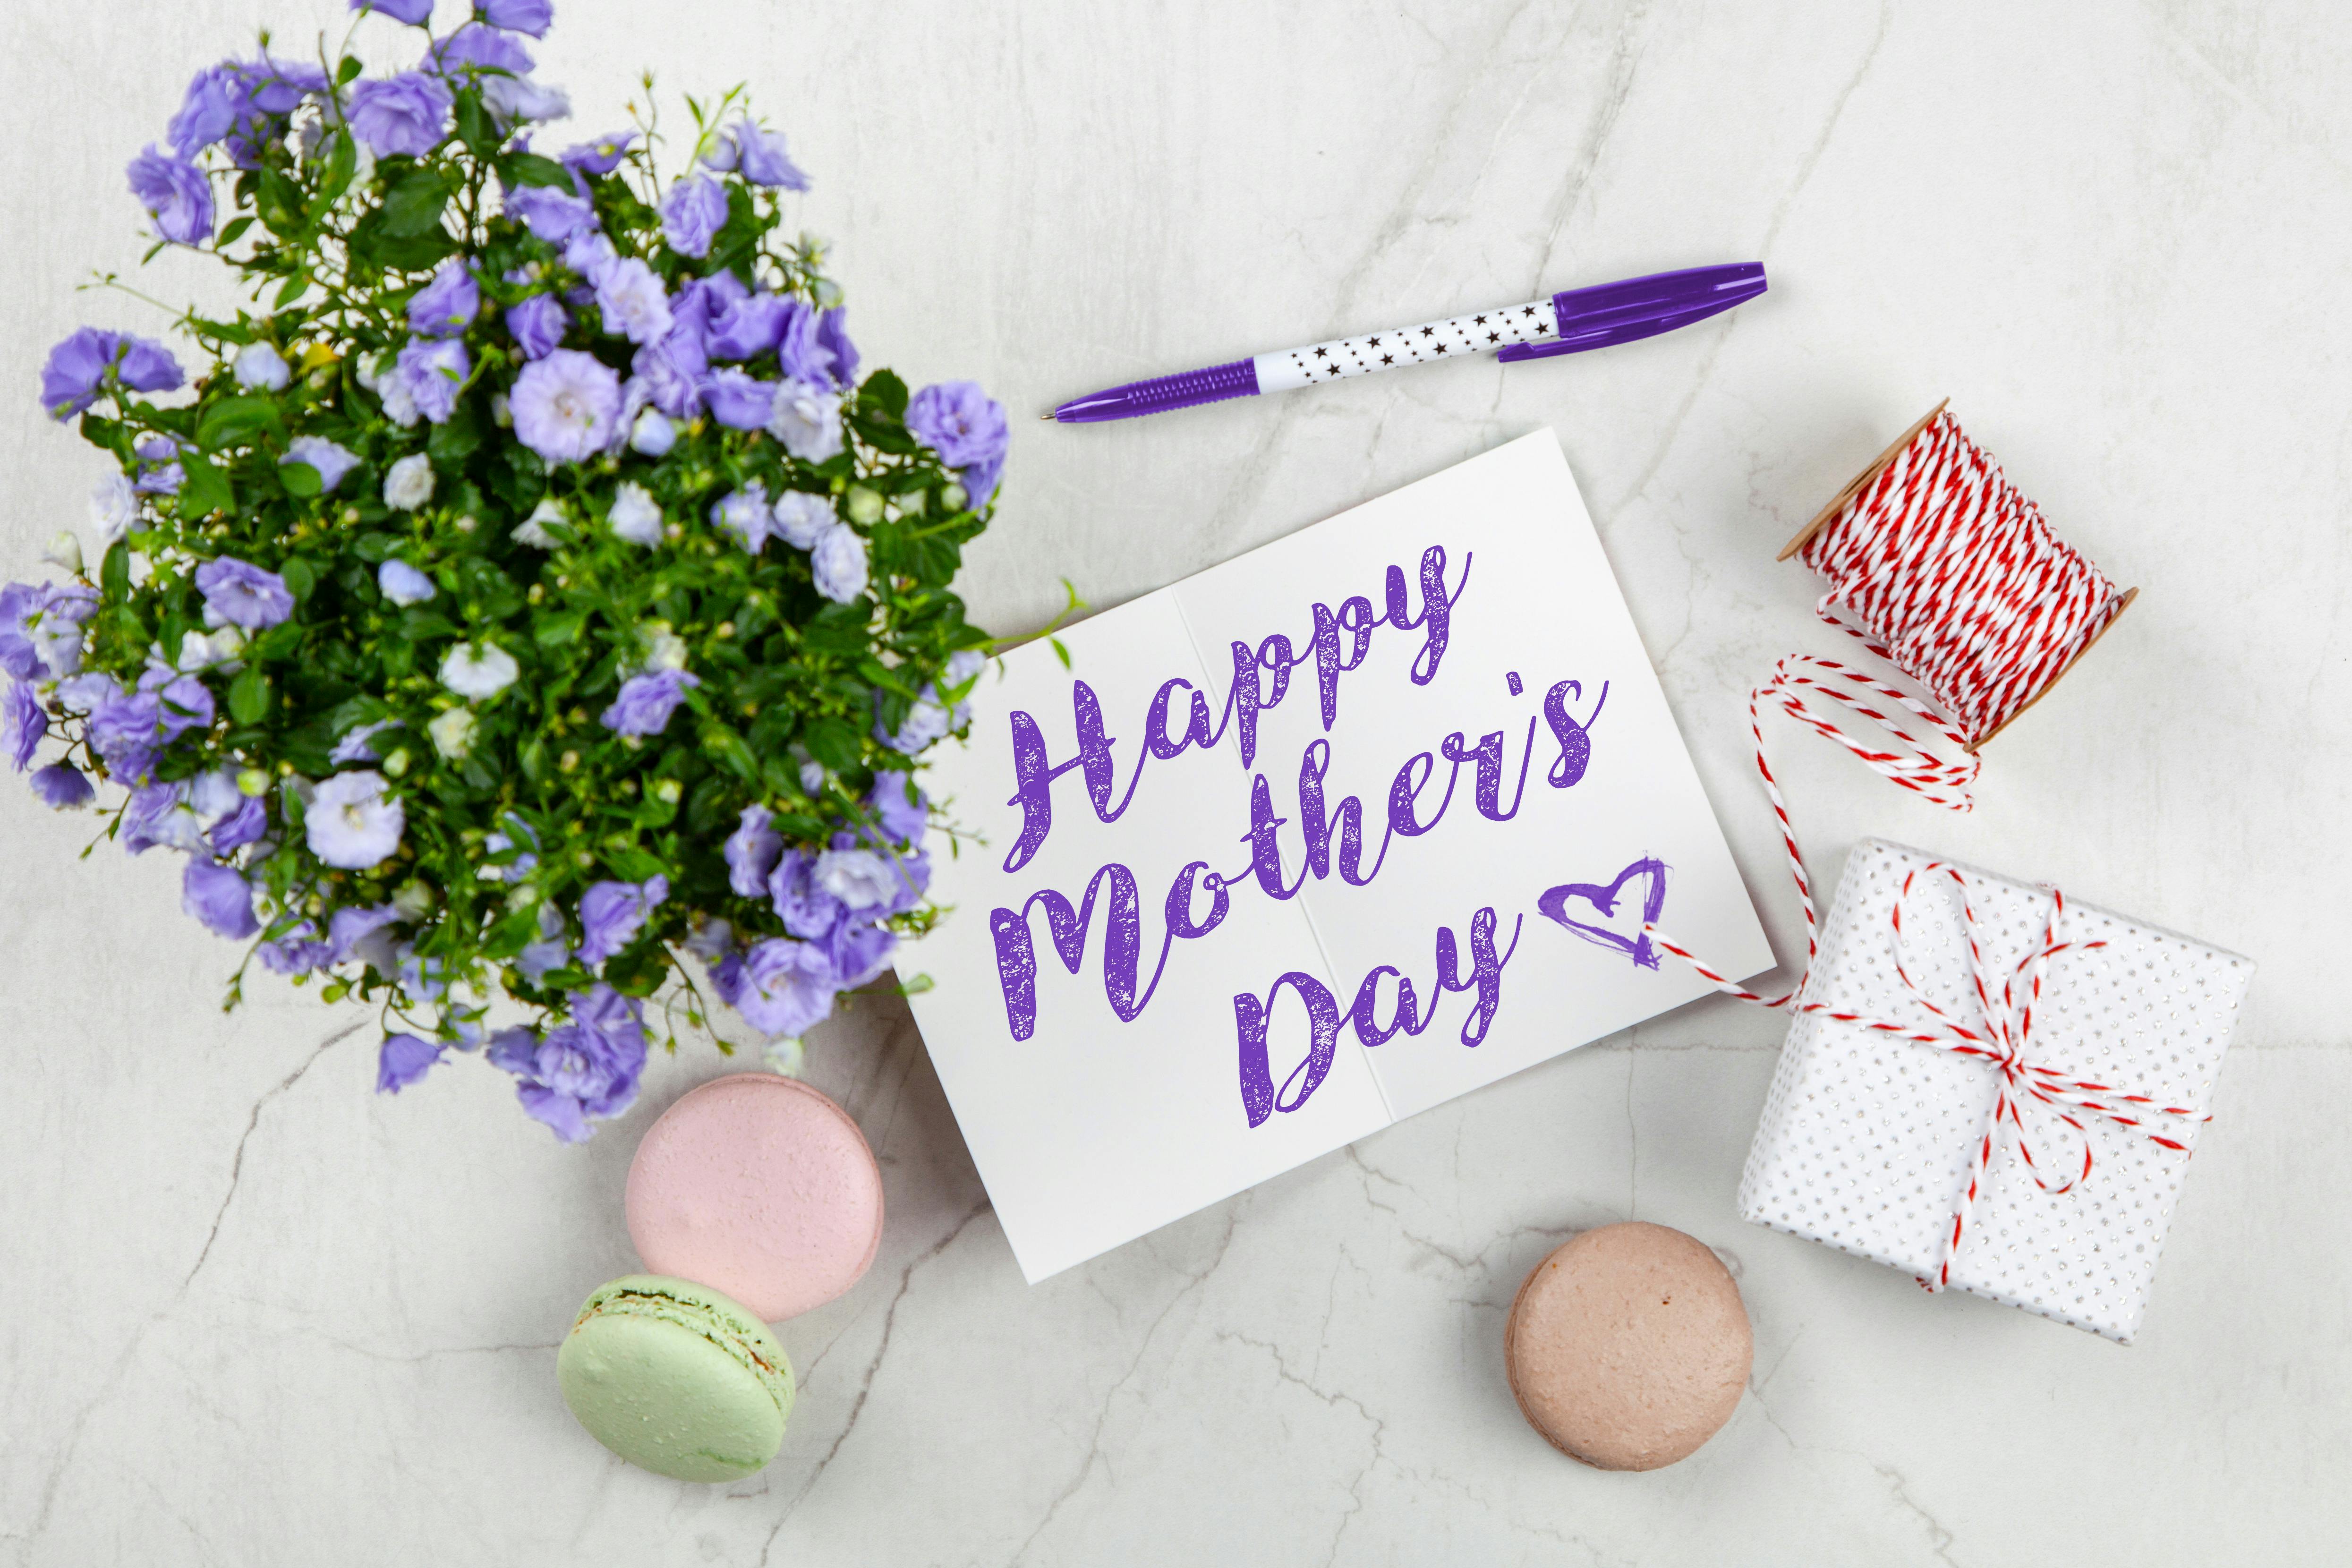 A Mother's Day card | Source: Pexels